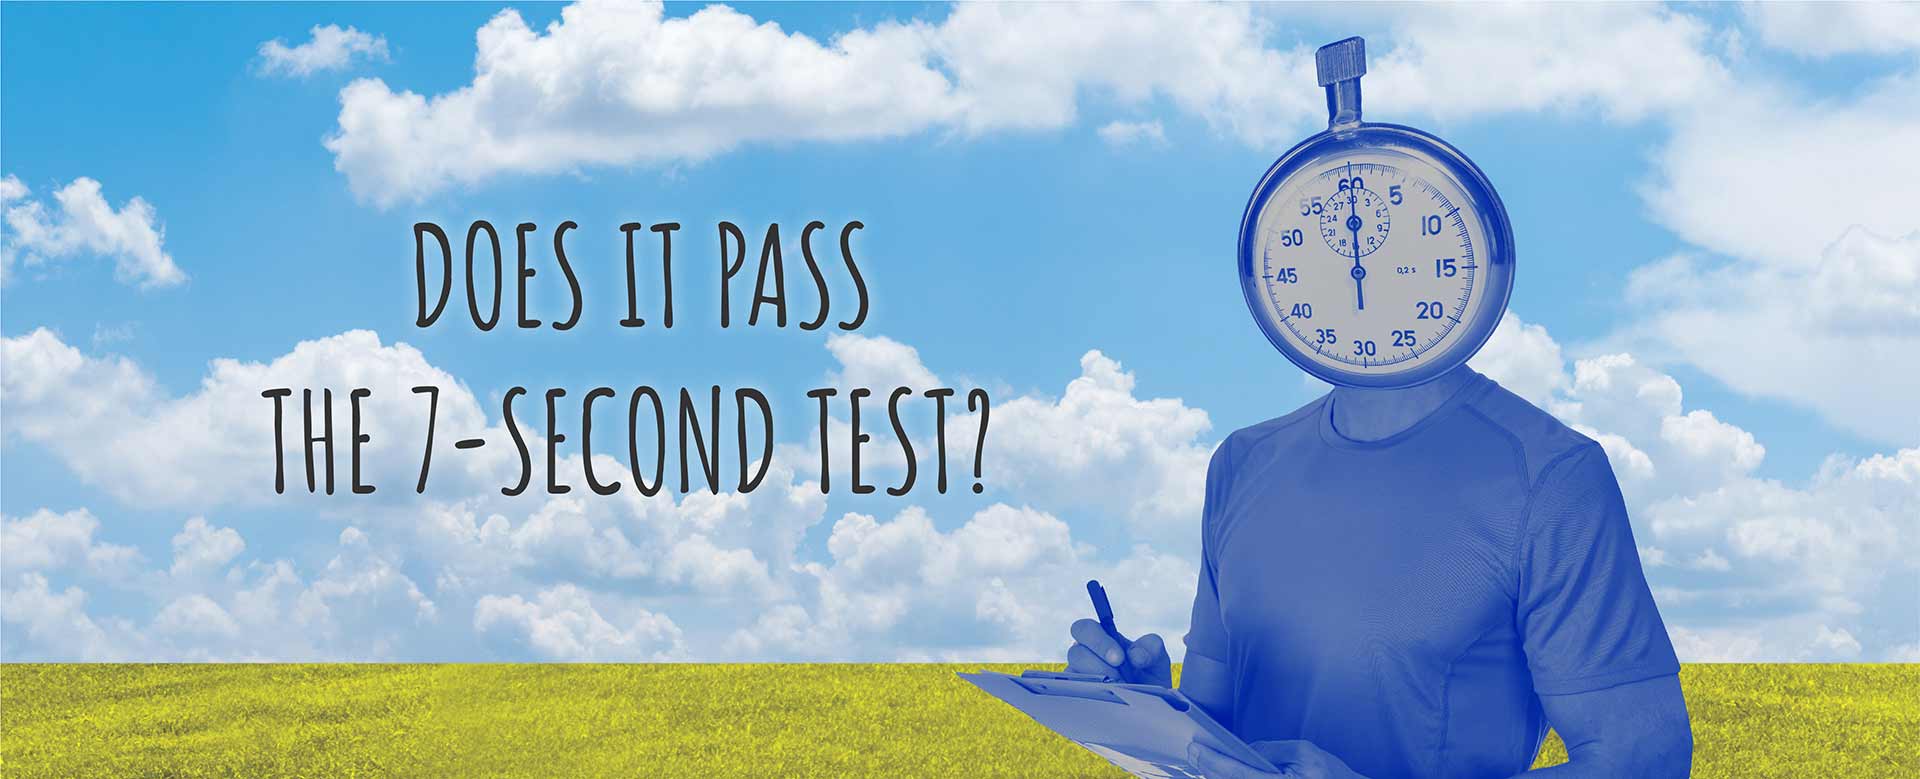 Does it Pass the 7-Second Test?